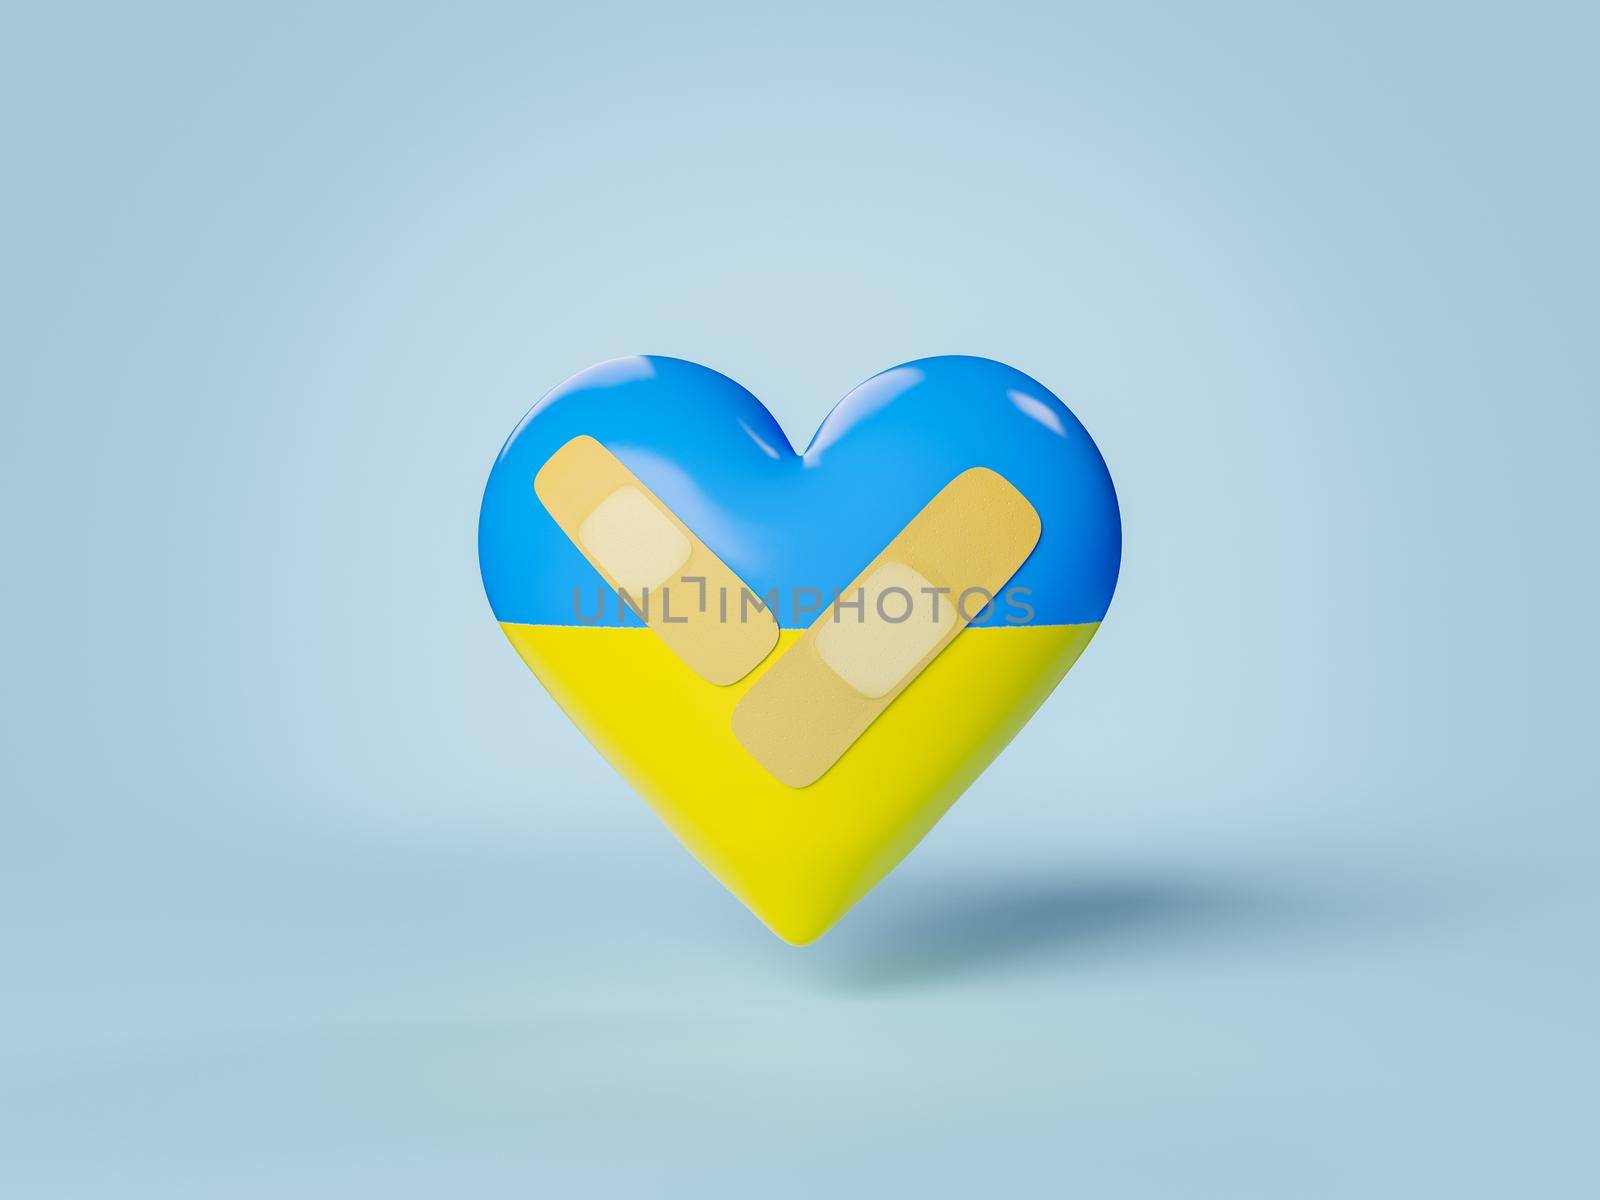 ukraine flag on heart with bandage for wounds by asolano